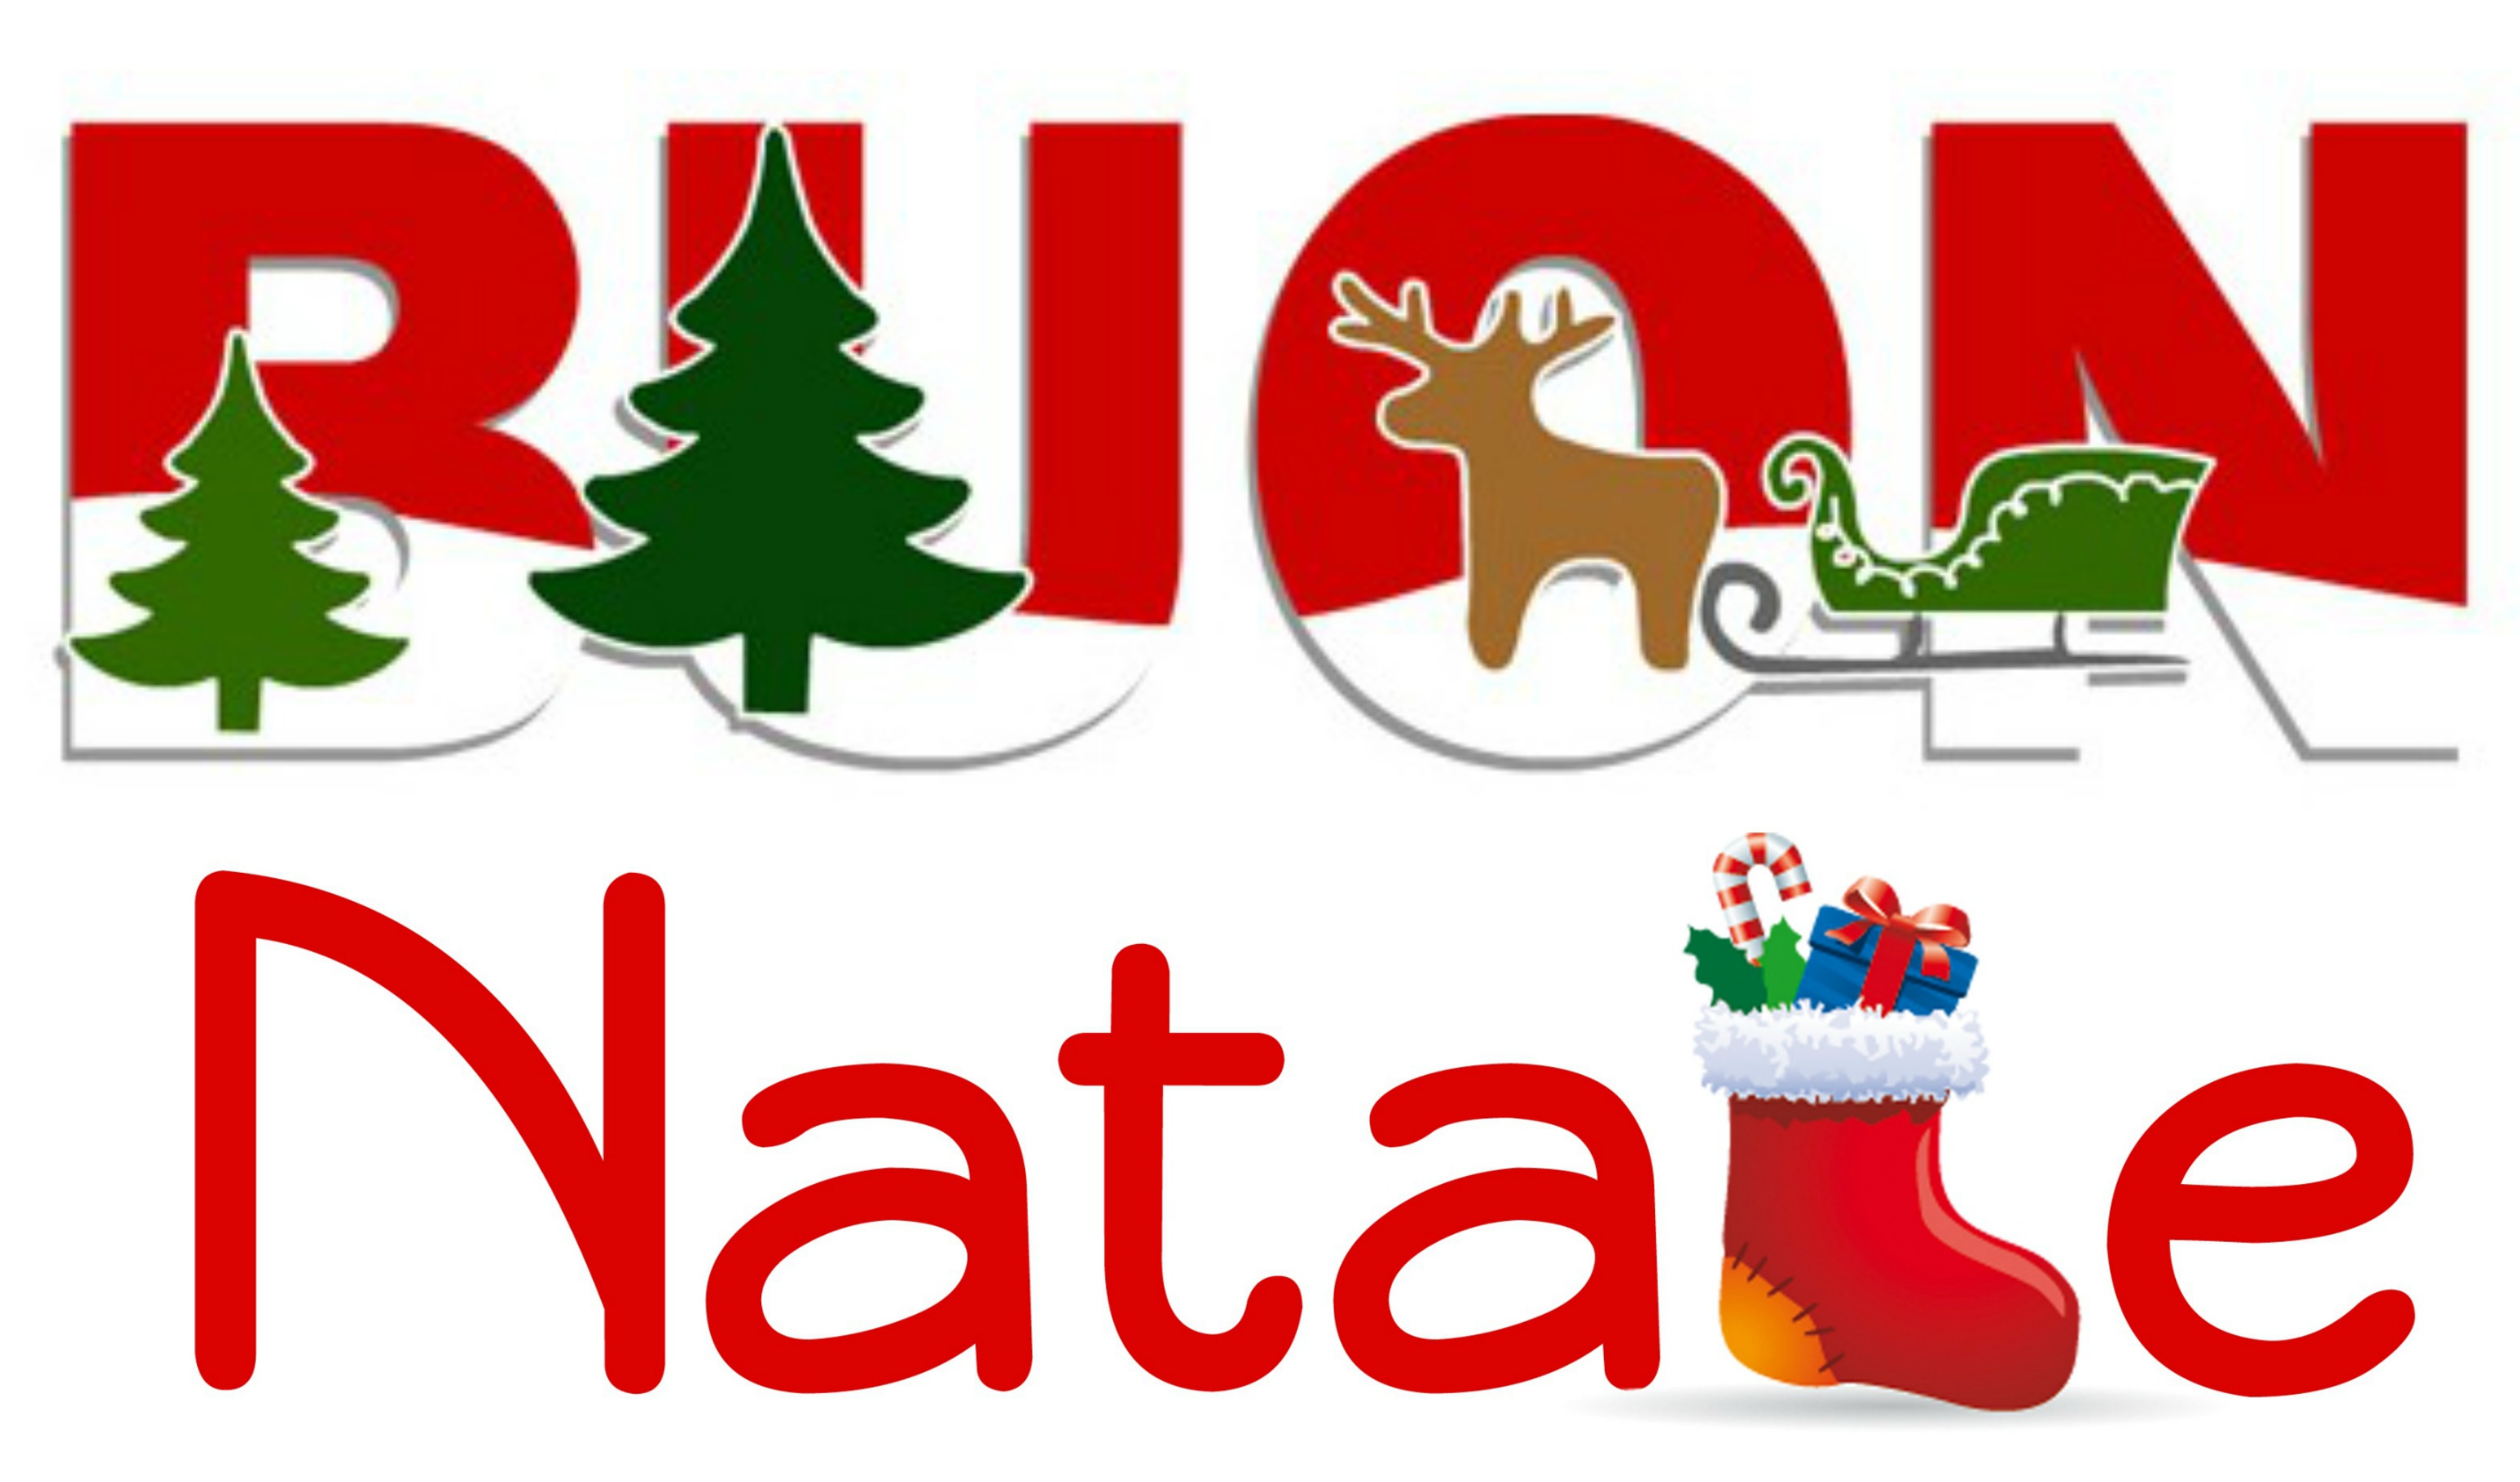 Buon Natale Wishes Italian.Buon Natale Smile Laugh Travel Love Be Yourself Enjoy Life